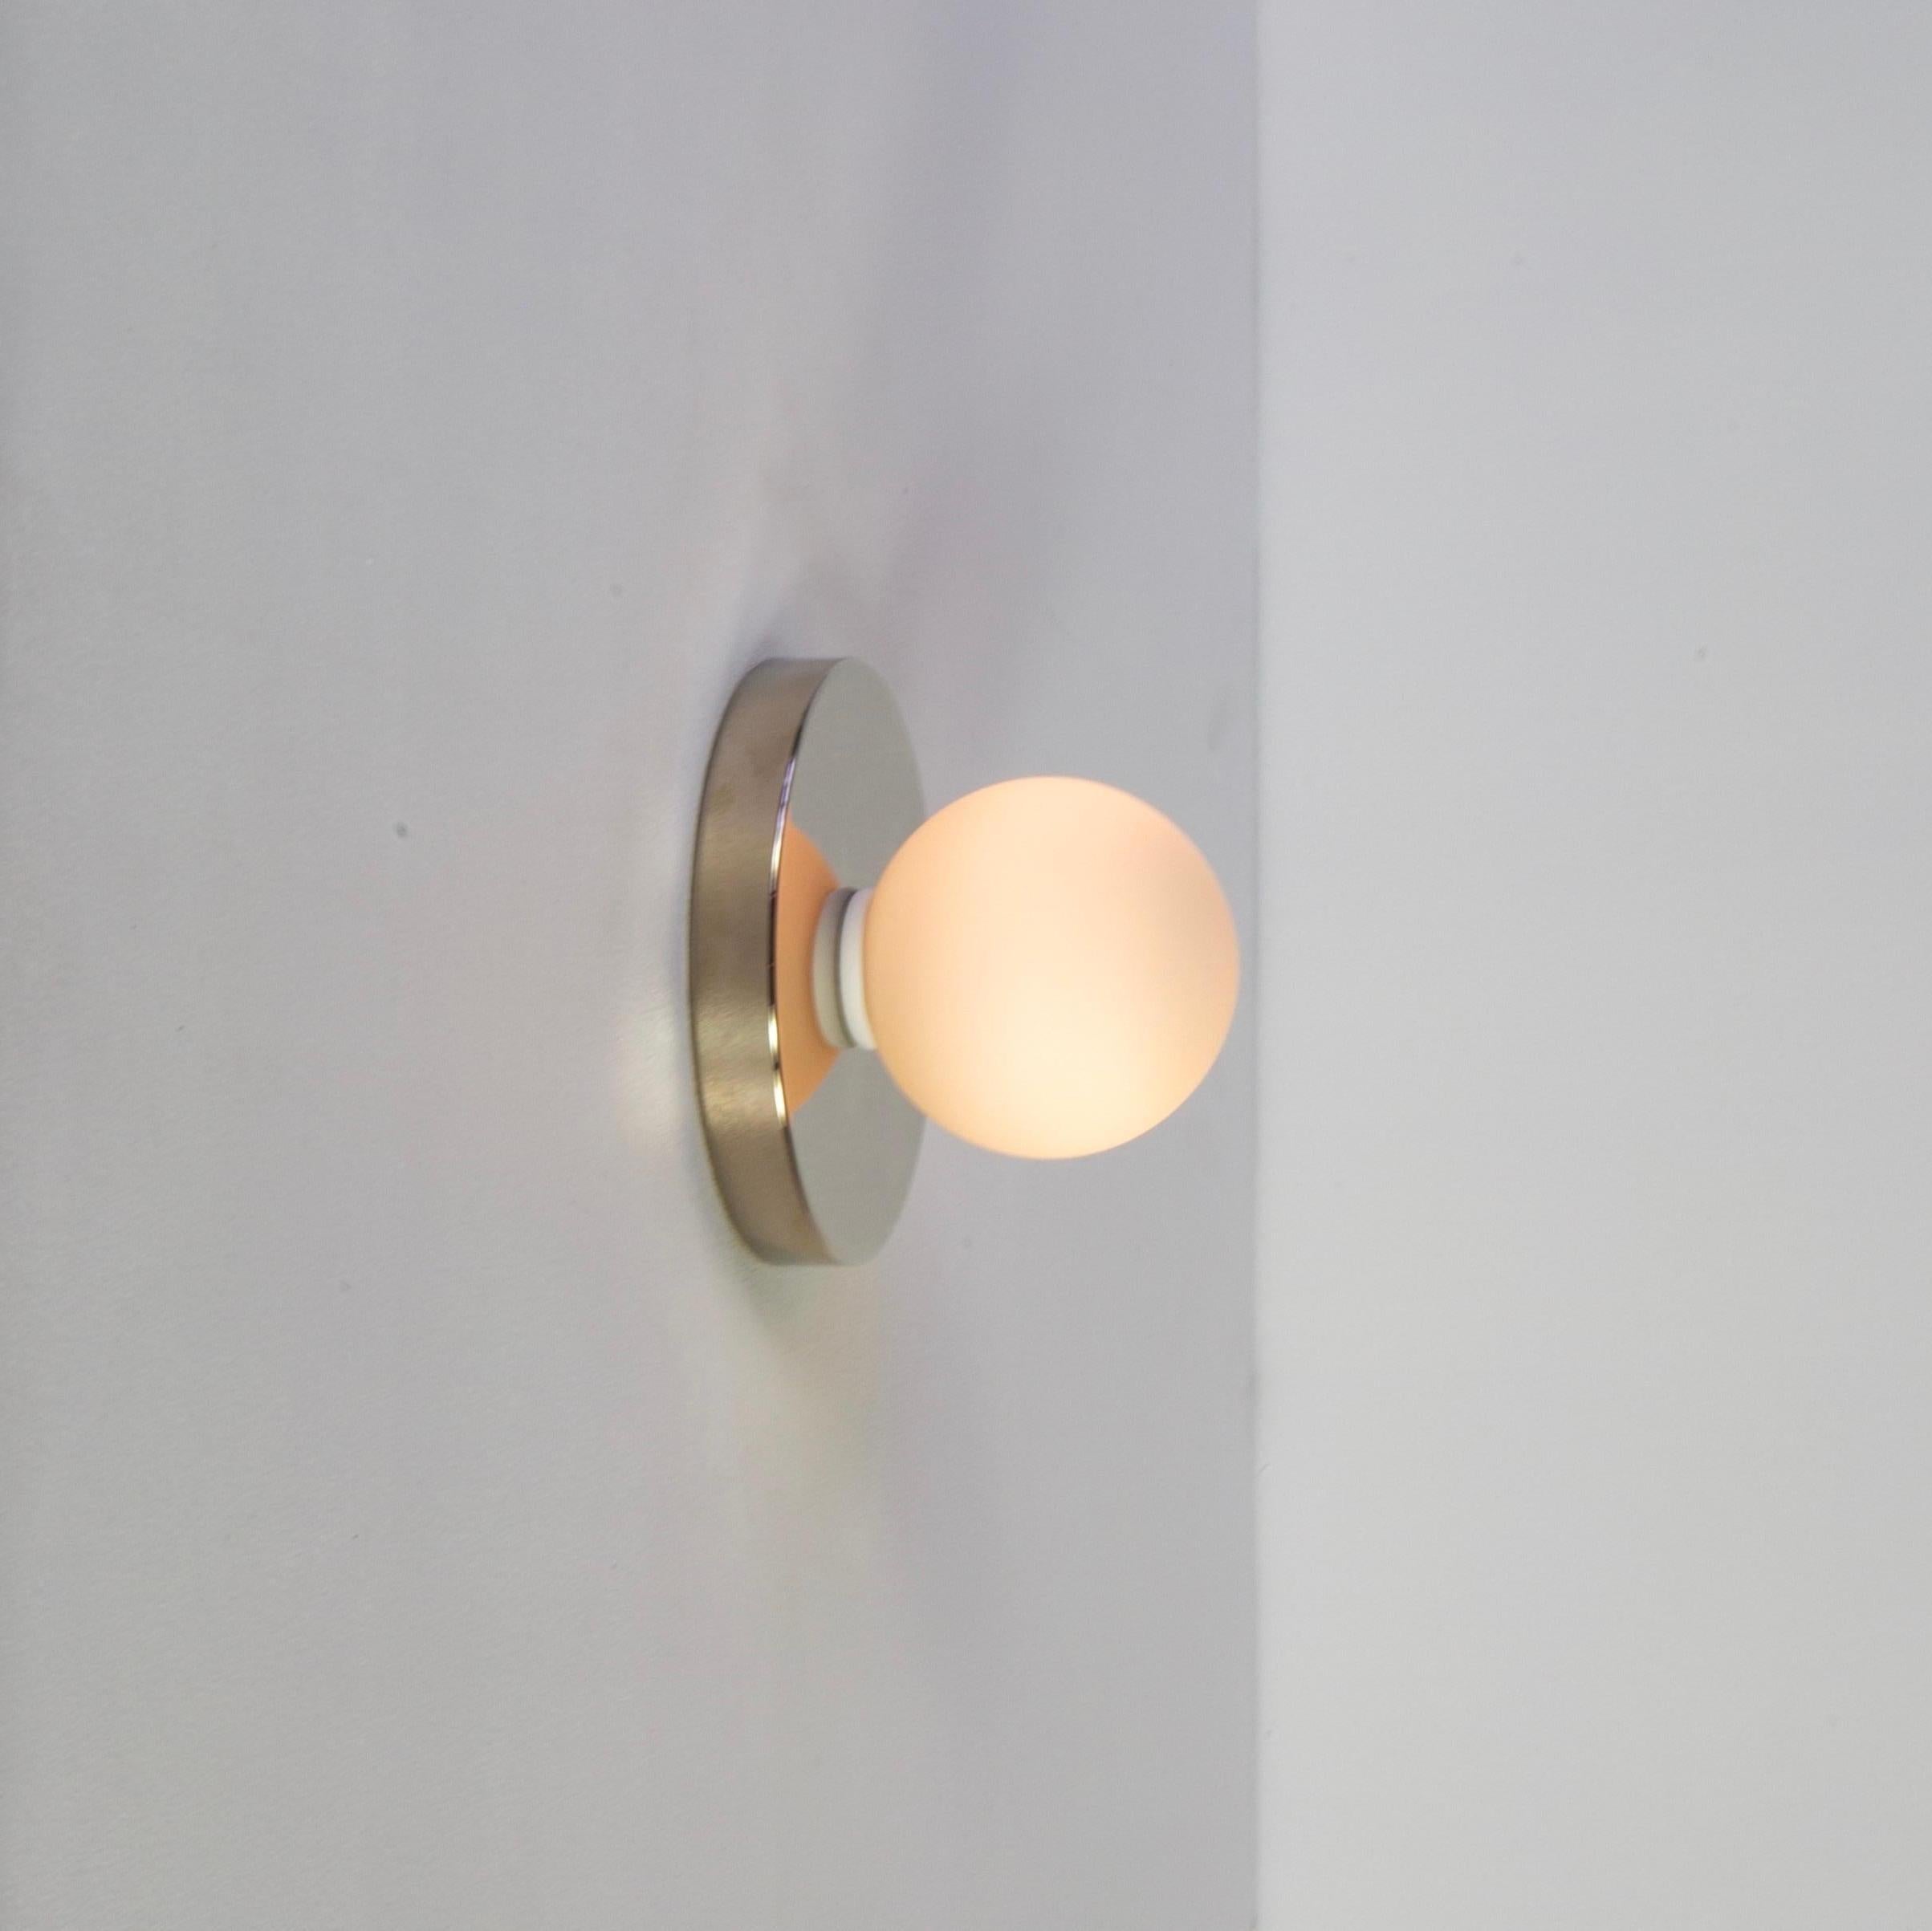 Plated Pair of Globe Sconces by Research.Lighting, Polished Nickel, Made to Order For Sale